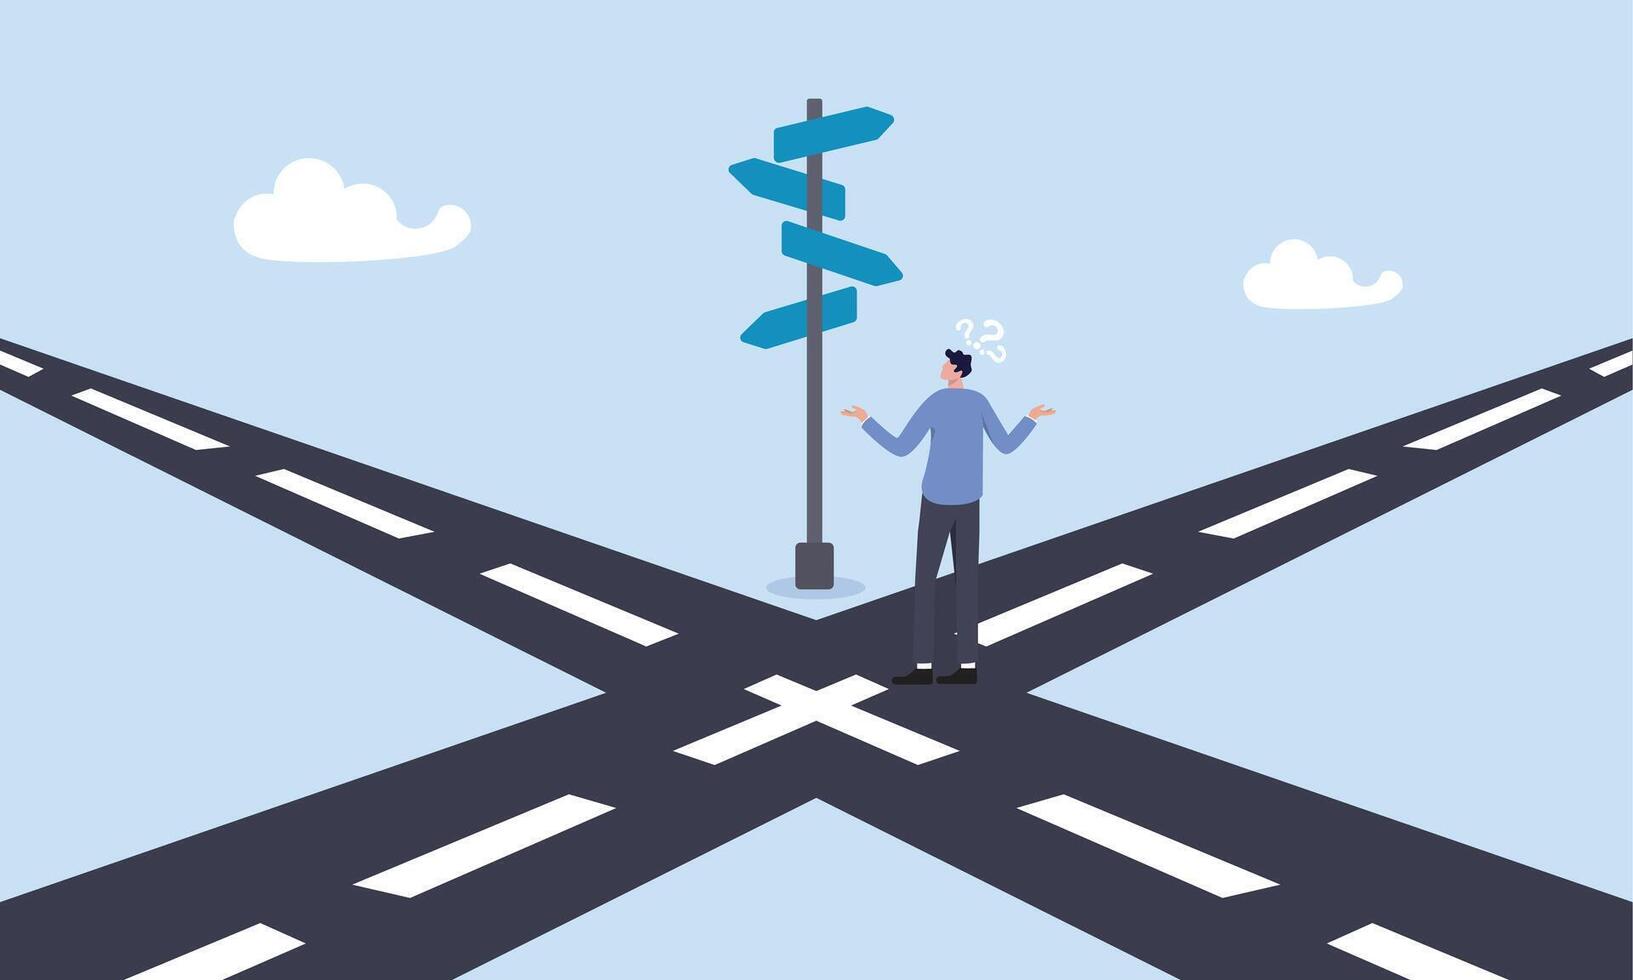 Business crossroads, finding solution or direction for success, confusion or what next challenge, opportunity choice or alternative concept, confused businessman at the crossroads thinking way to go. vector